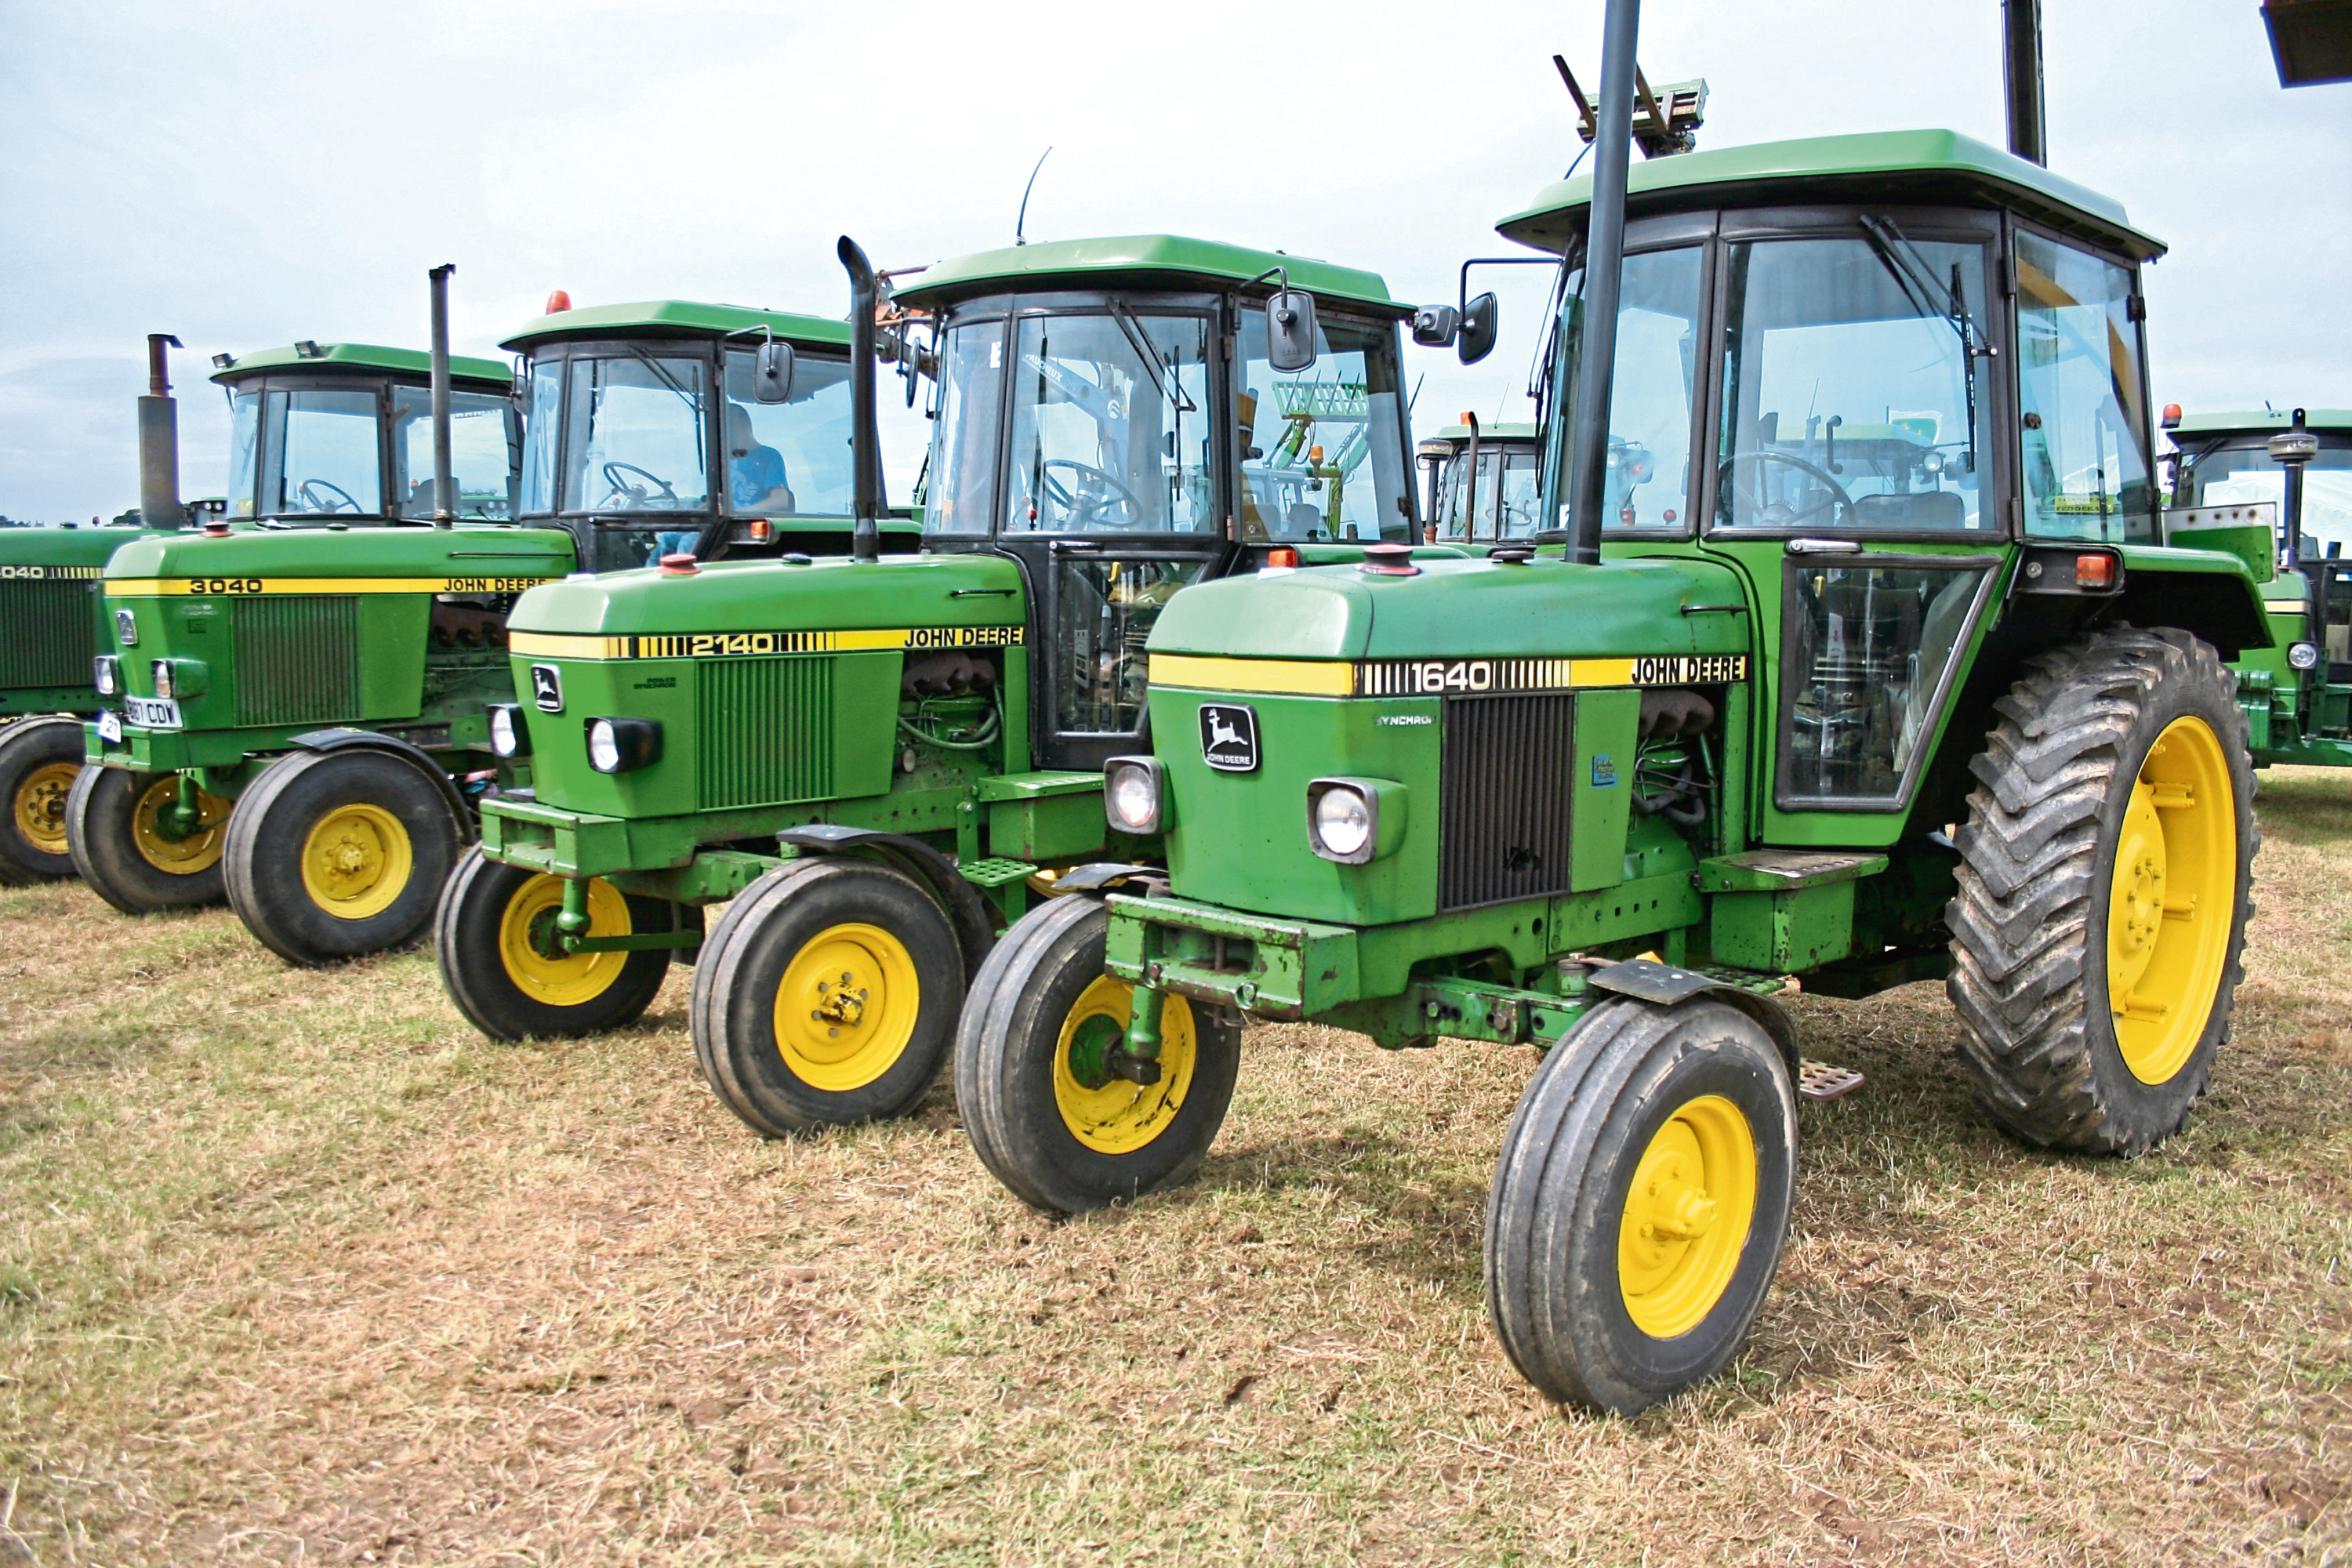 A line up of 1640 2140 and 3040 tractors all fitted with John Deere's SG2 cab at New Deer Show in 2102 when 175 years of John Deere was celebrated.